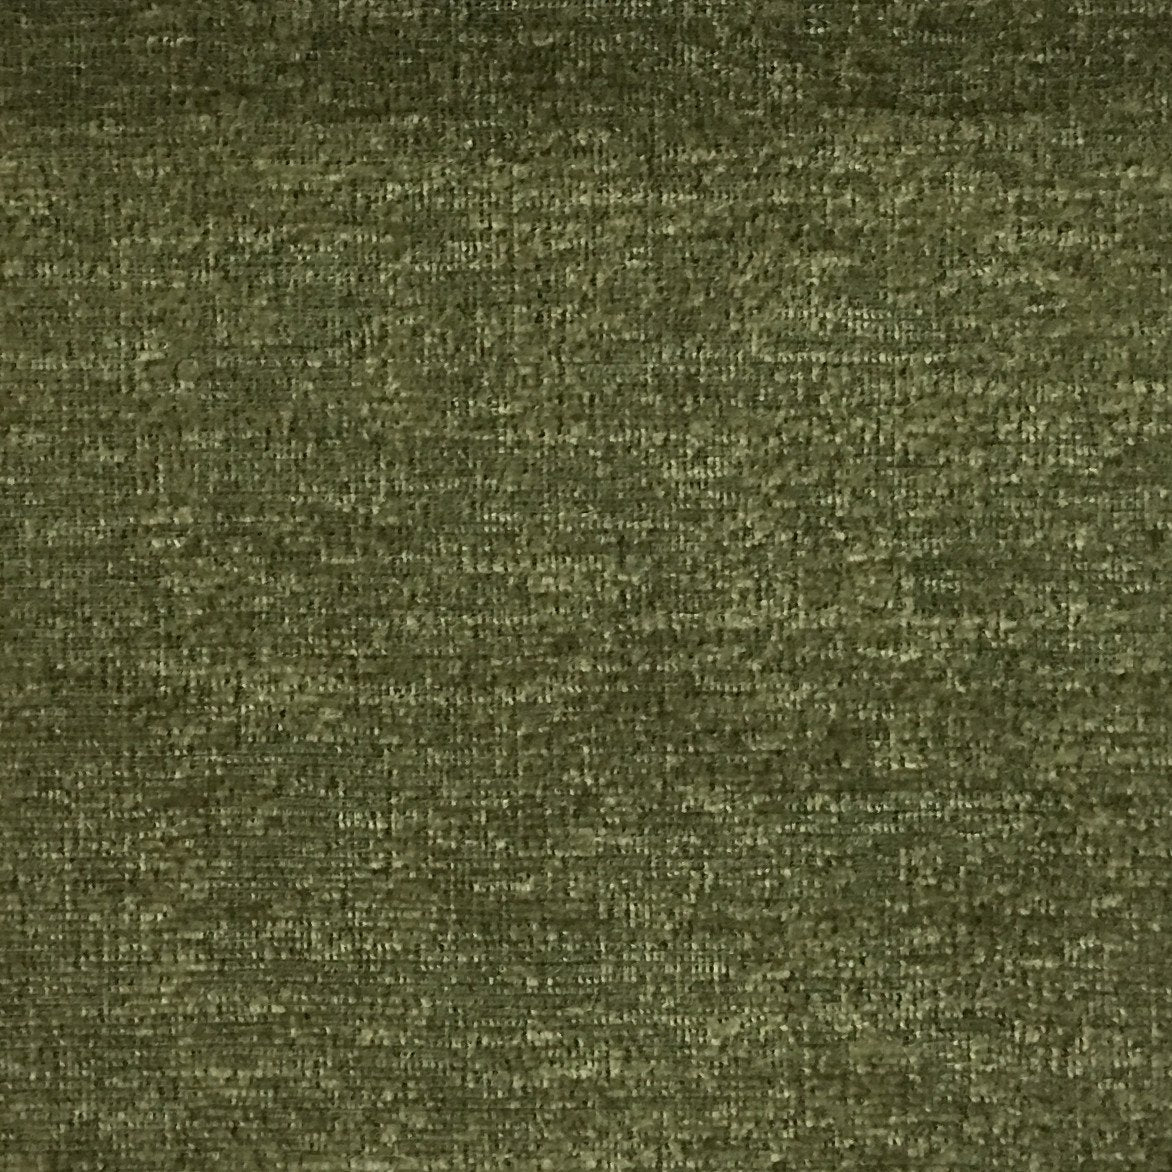 6704715 SOPHIE OLIVE Solid Color Chenille Upholstery Fabric